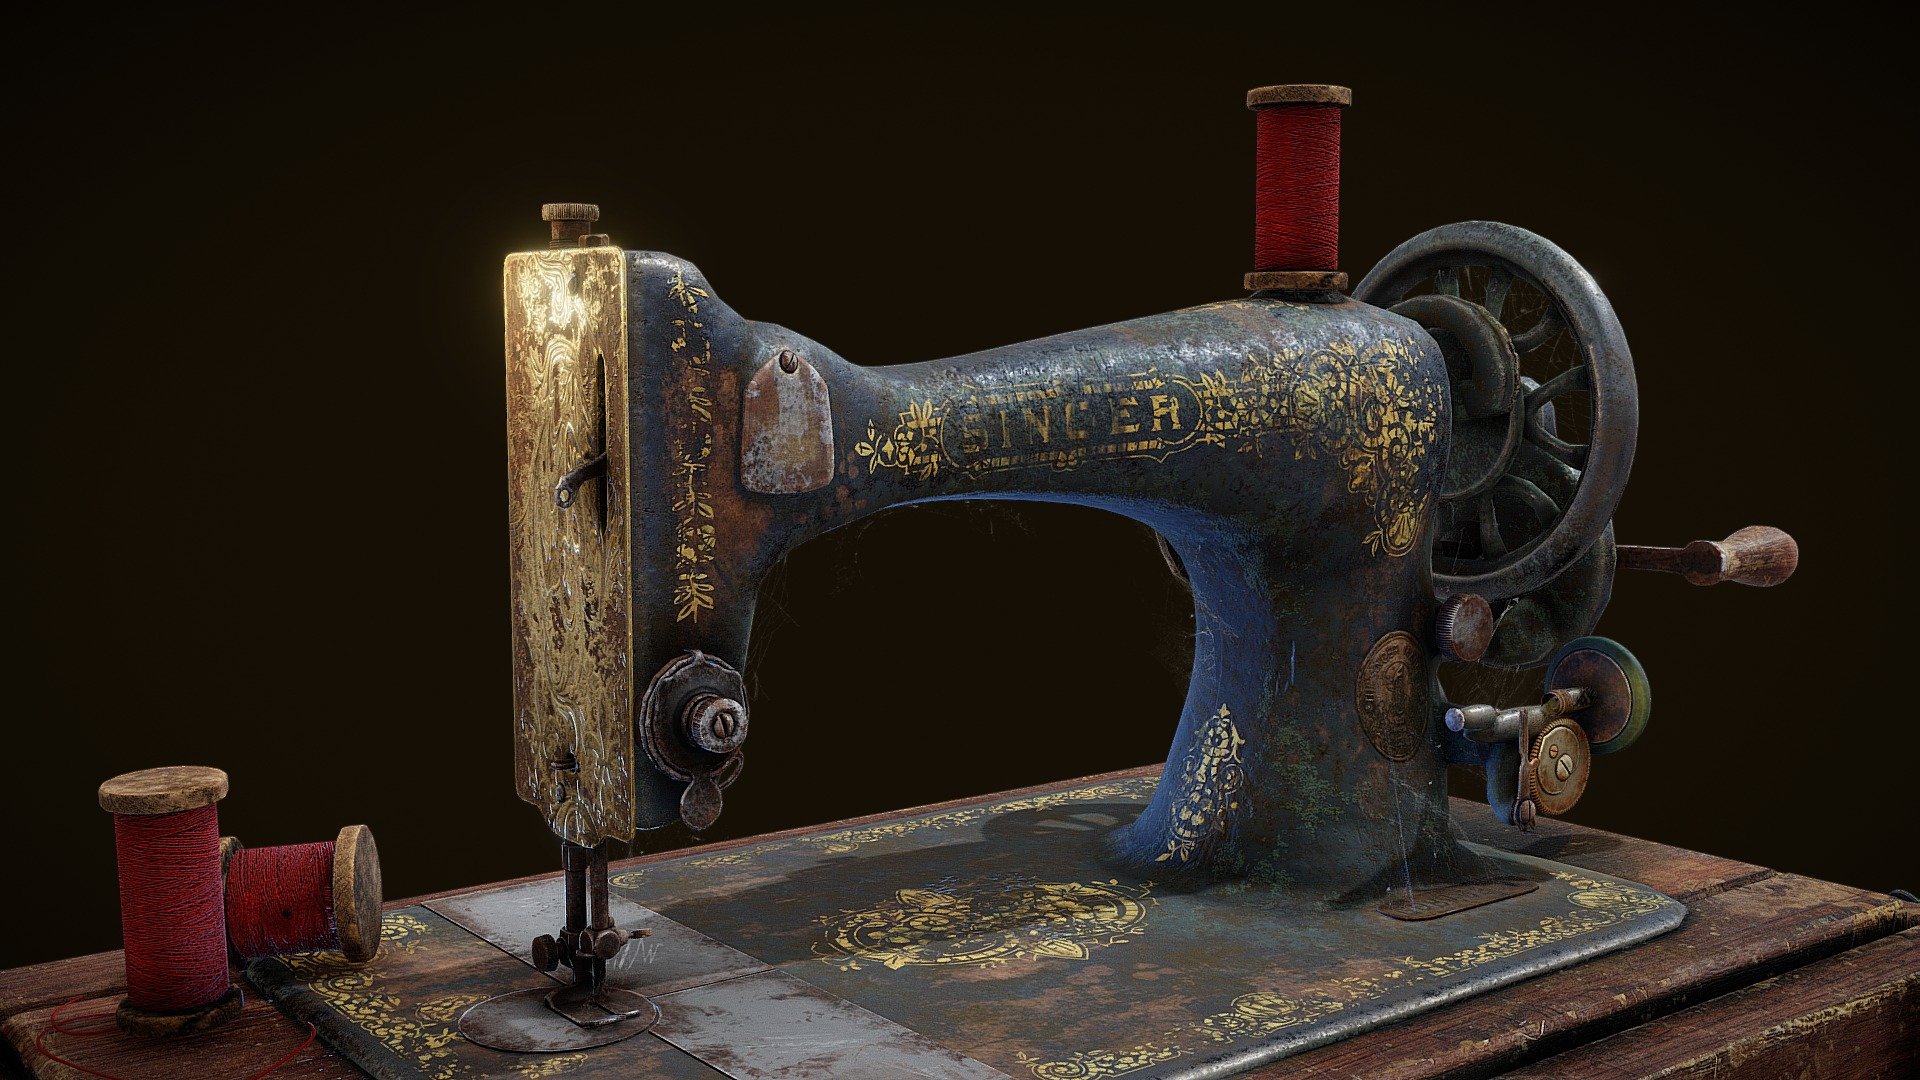 A highly detailed, 4k textured, game-ready Hero Prop 1892 Singer Hand Crank Sewing Machine. An antique device for sewing found in a dusty attic along with other seamstress tools.

Low-Poly, Stylized, PBR, Game-Ready asset made with Maya, Substance Painter, and Zbrush. All texture channels included. Include's hi-poly sculpt.







CONTACT for other model formats if neccesary 3d model